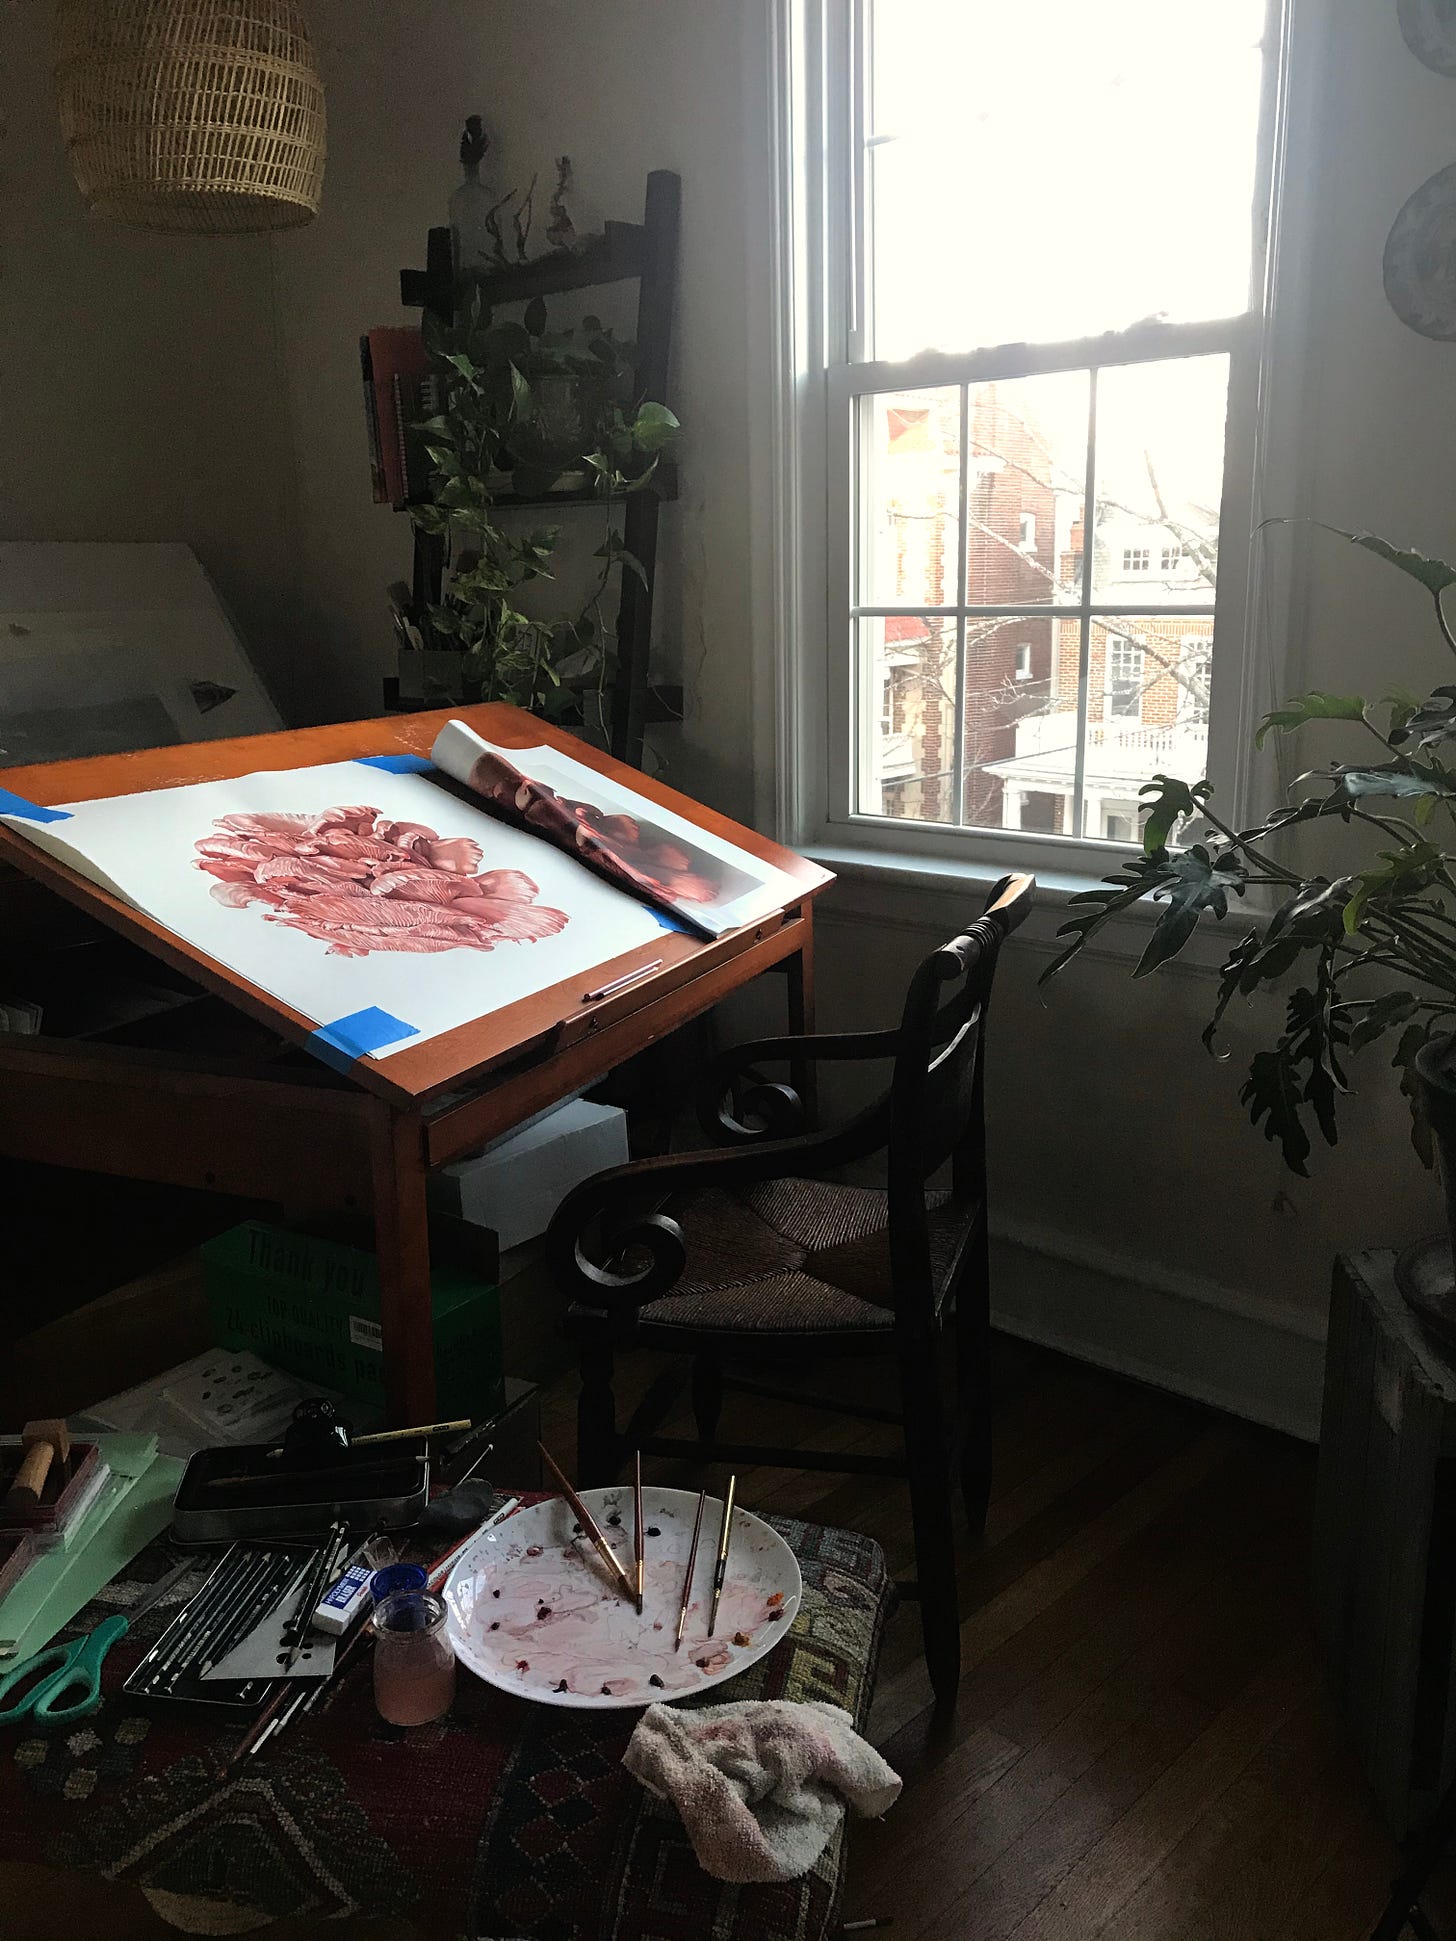 A photo of the studio space, the finished painting taped to the desk, with a window and plants close by